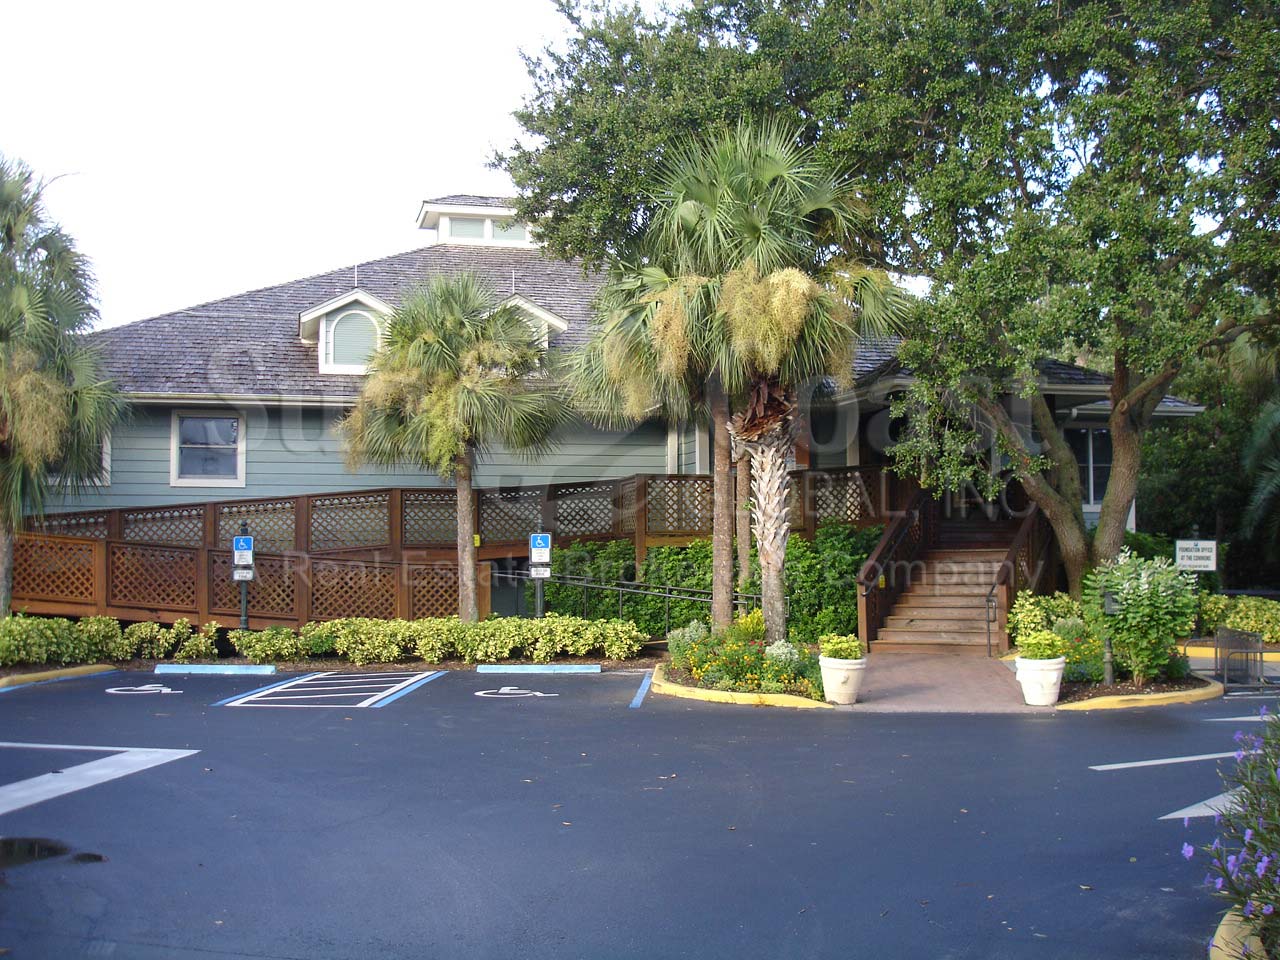 PELICAN BAY Commons office